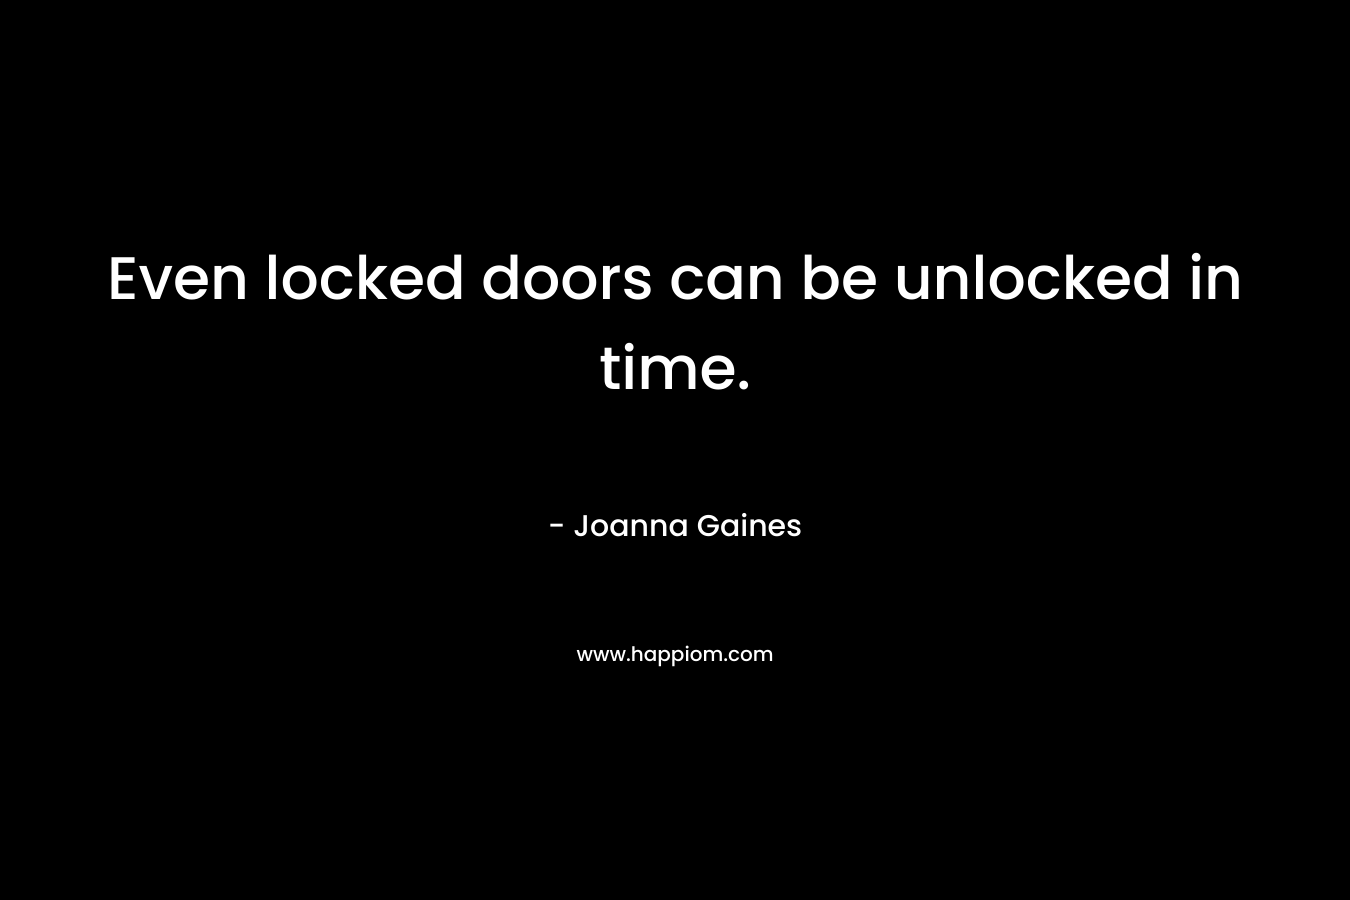 Even locked doors can be unlocked in time. – Joanna Gaines